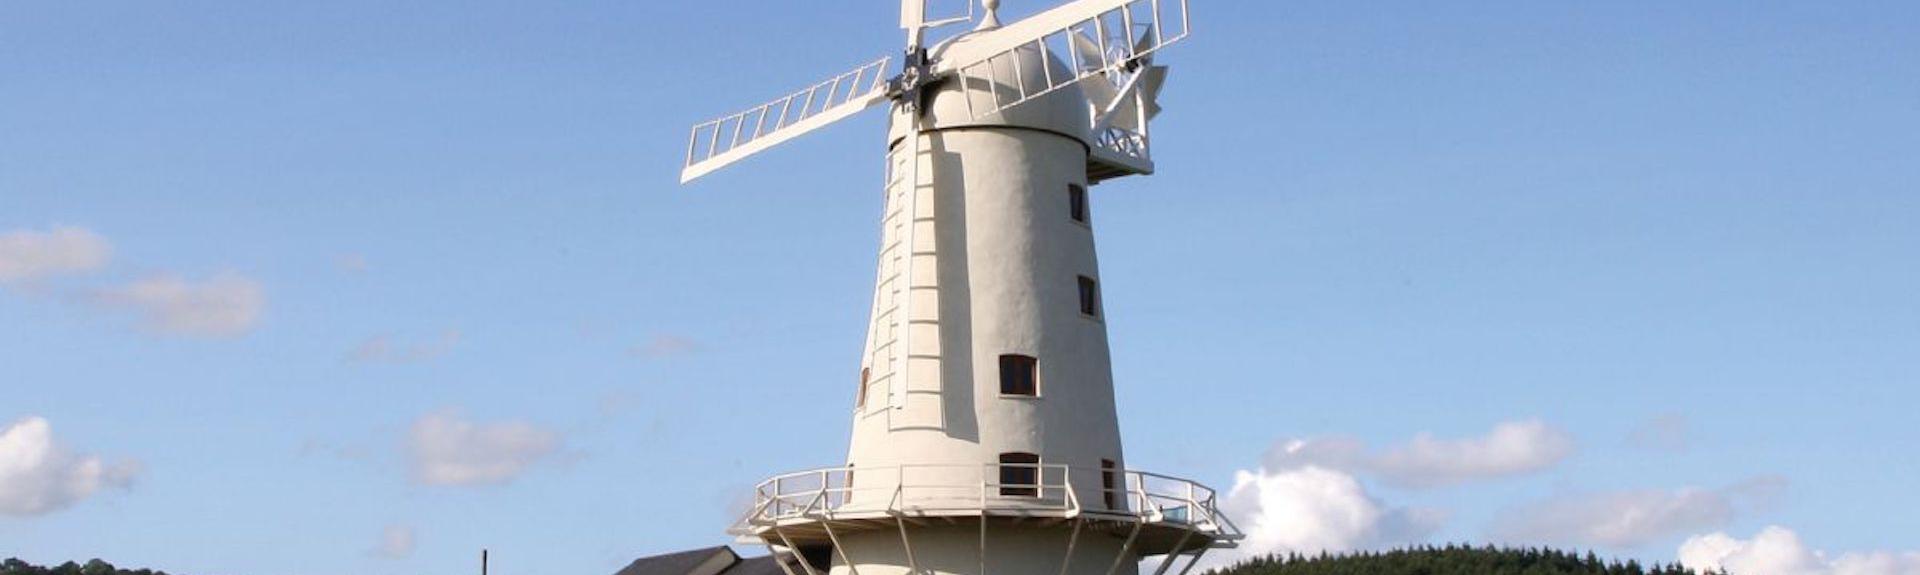 A restored windmill stands in the middle of a field of ripe wheat.